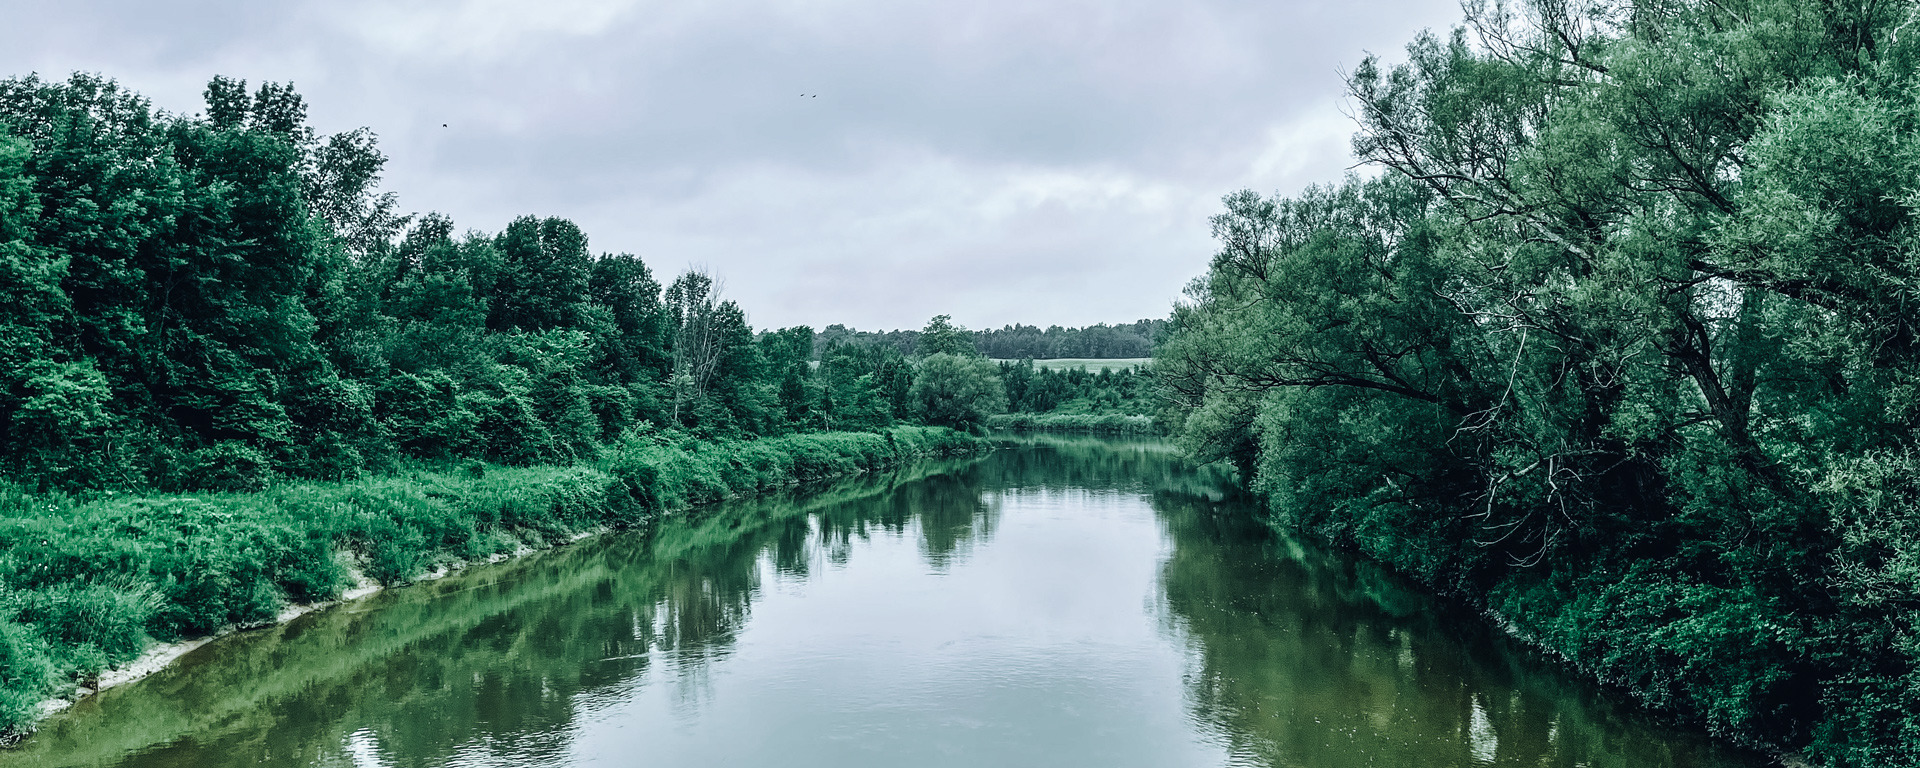 Looking down the Saugeen River. The cloudy sky is reflected on the water's surface. The river is flanked by deep green trees